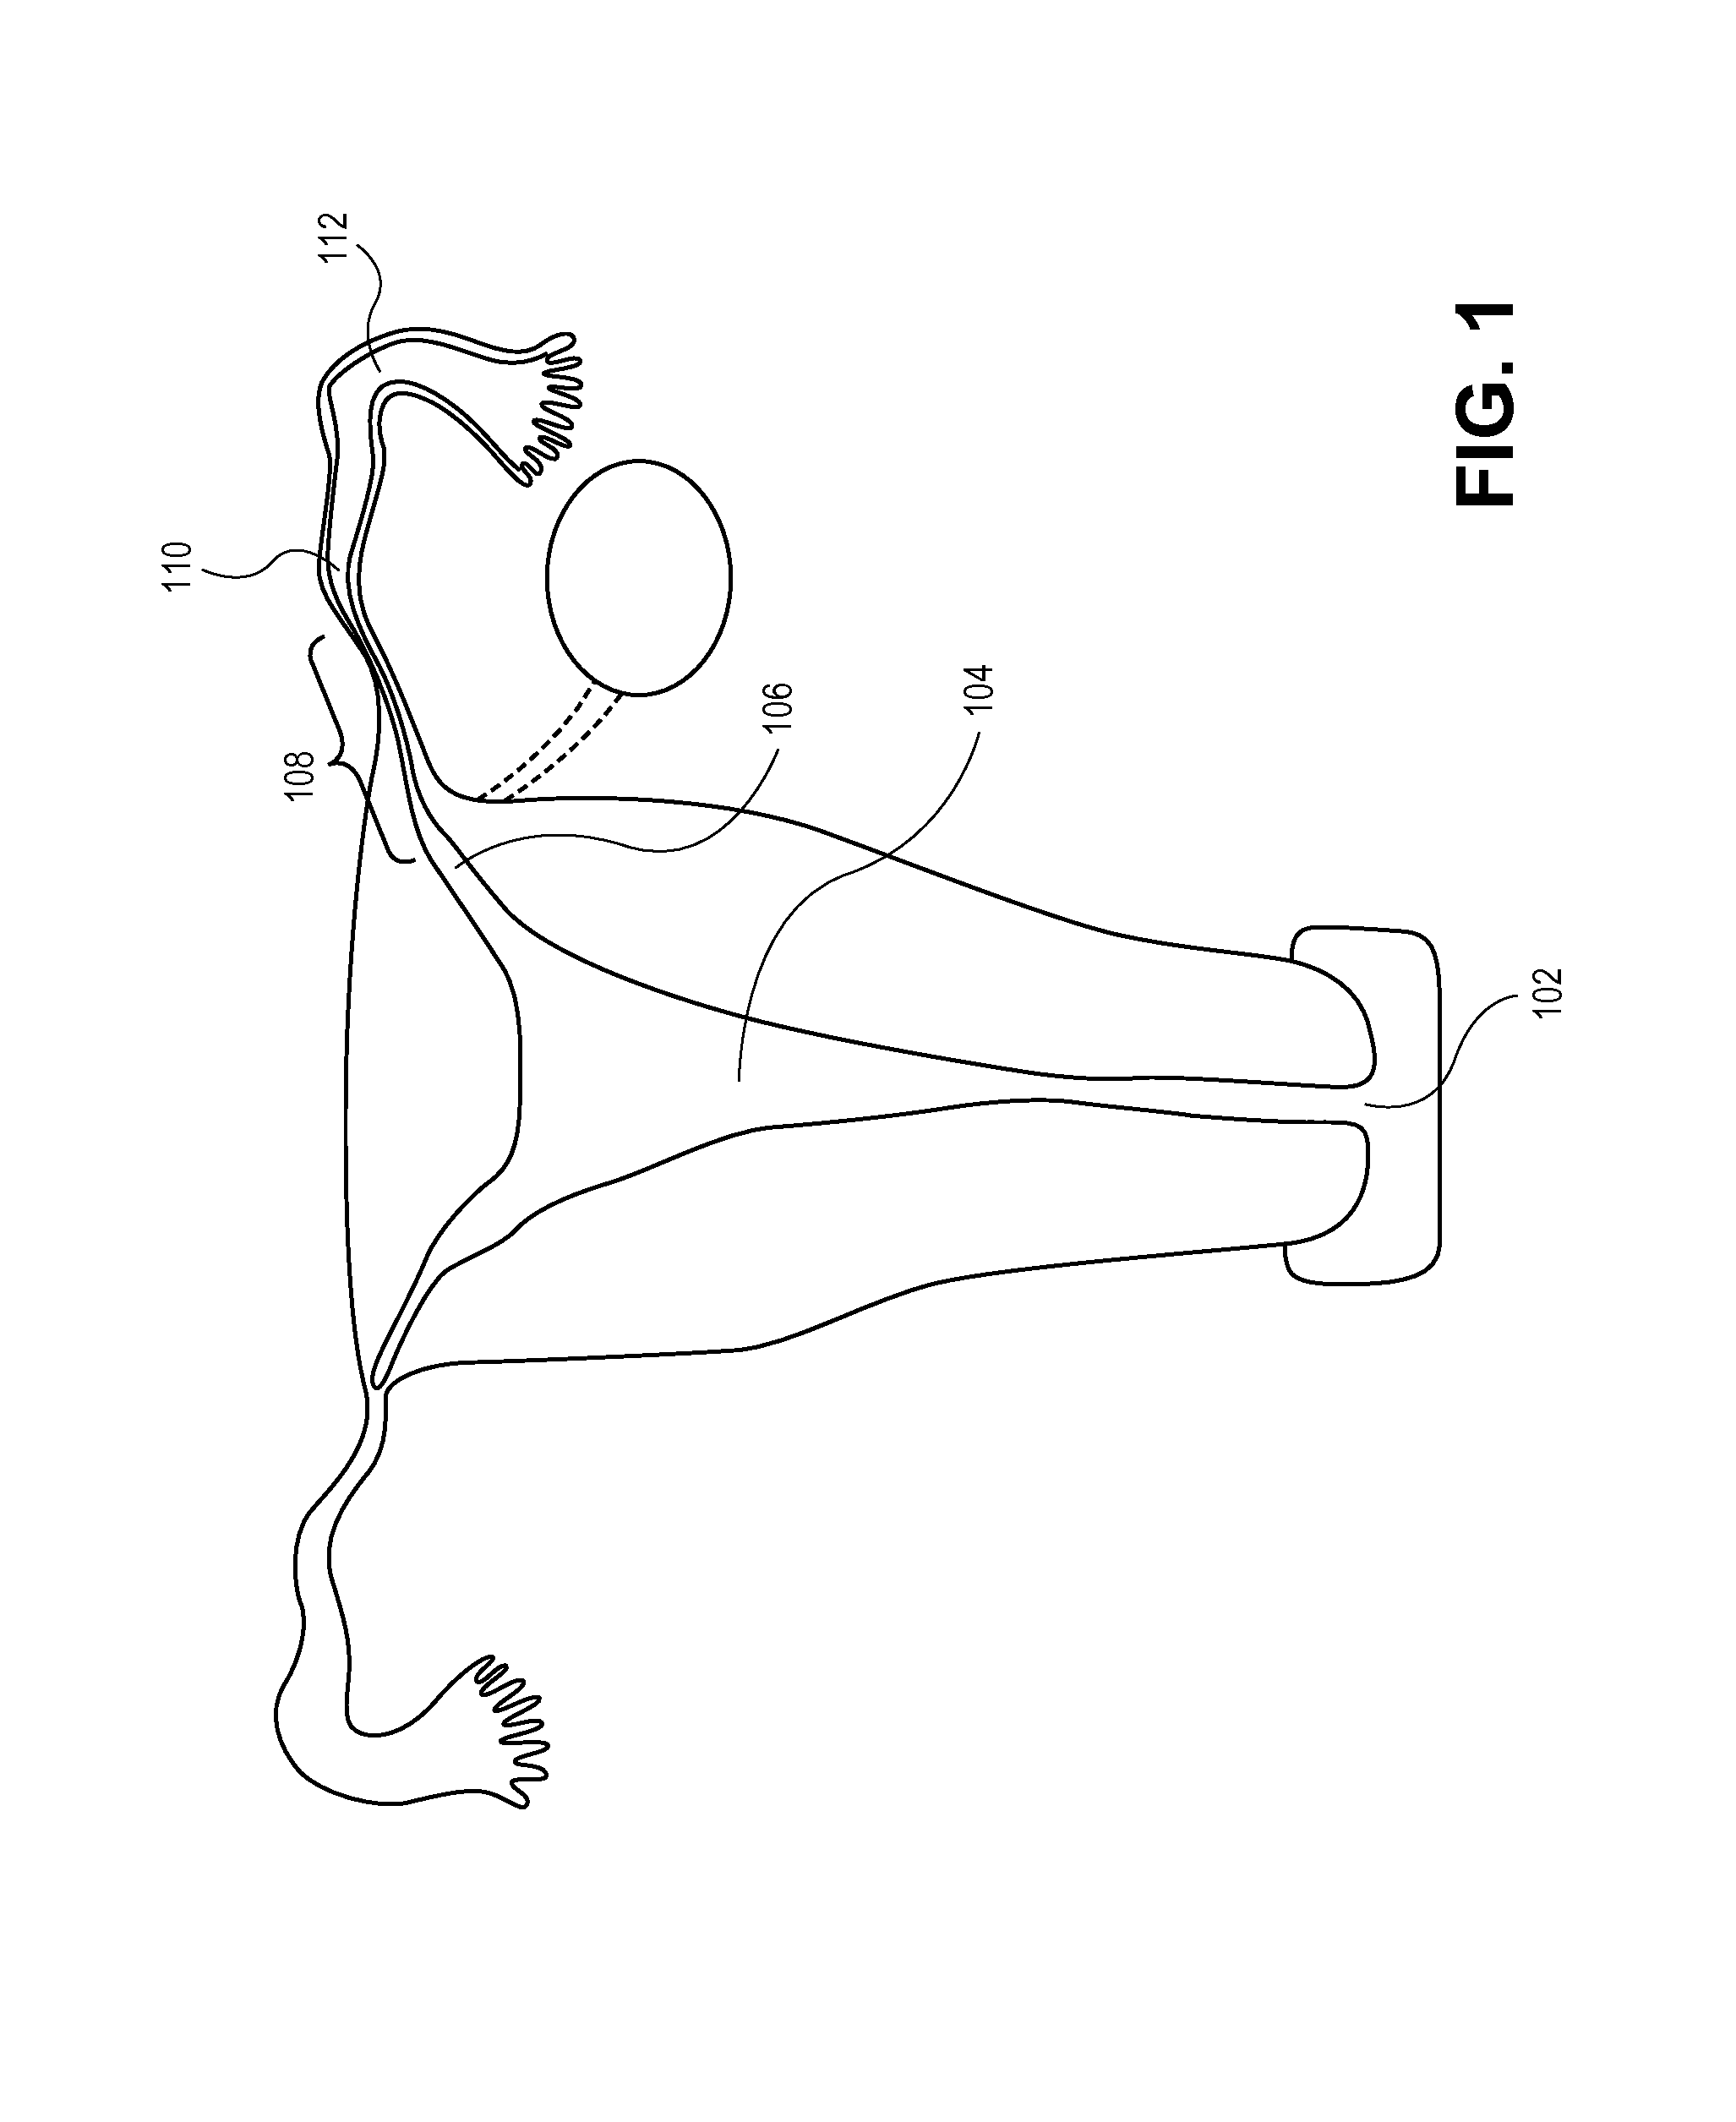 Occlusion device with openable channel